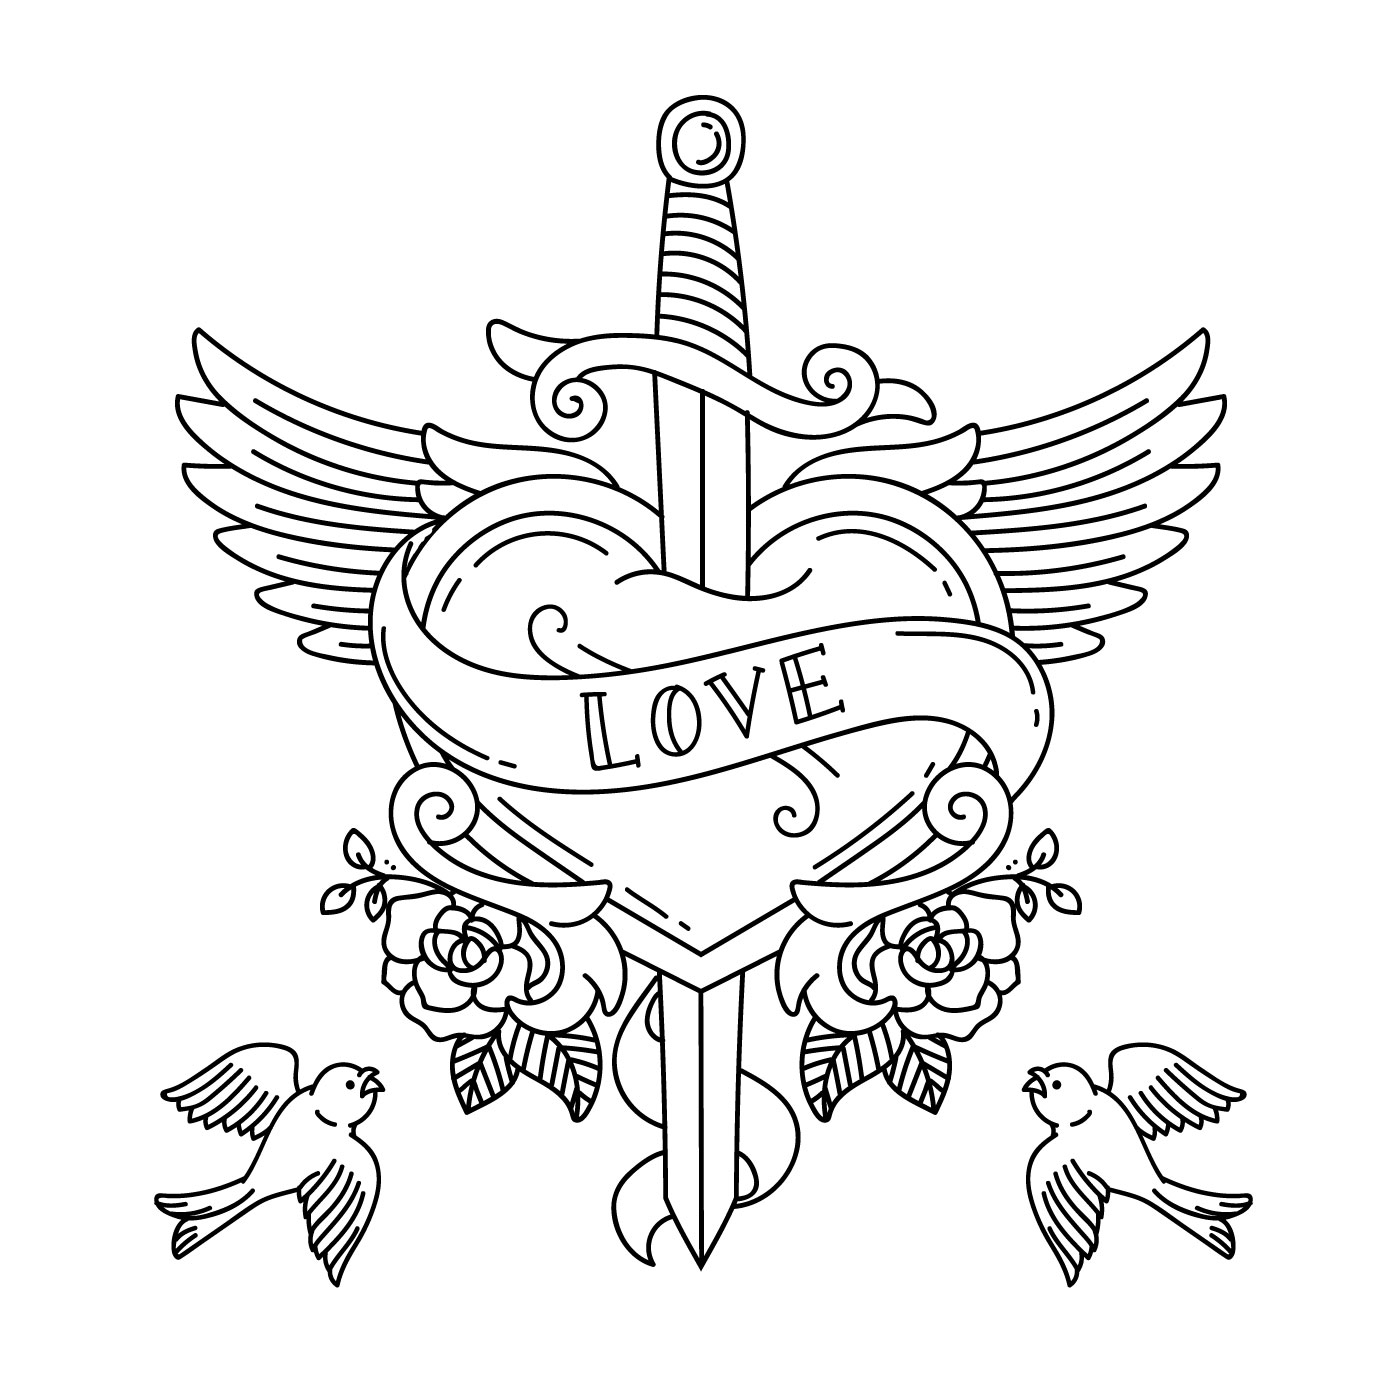 Heart Tattoo With Wings And Knife - Download Free Vectors ...